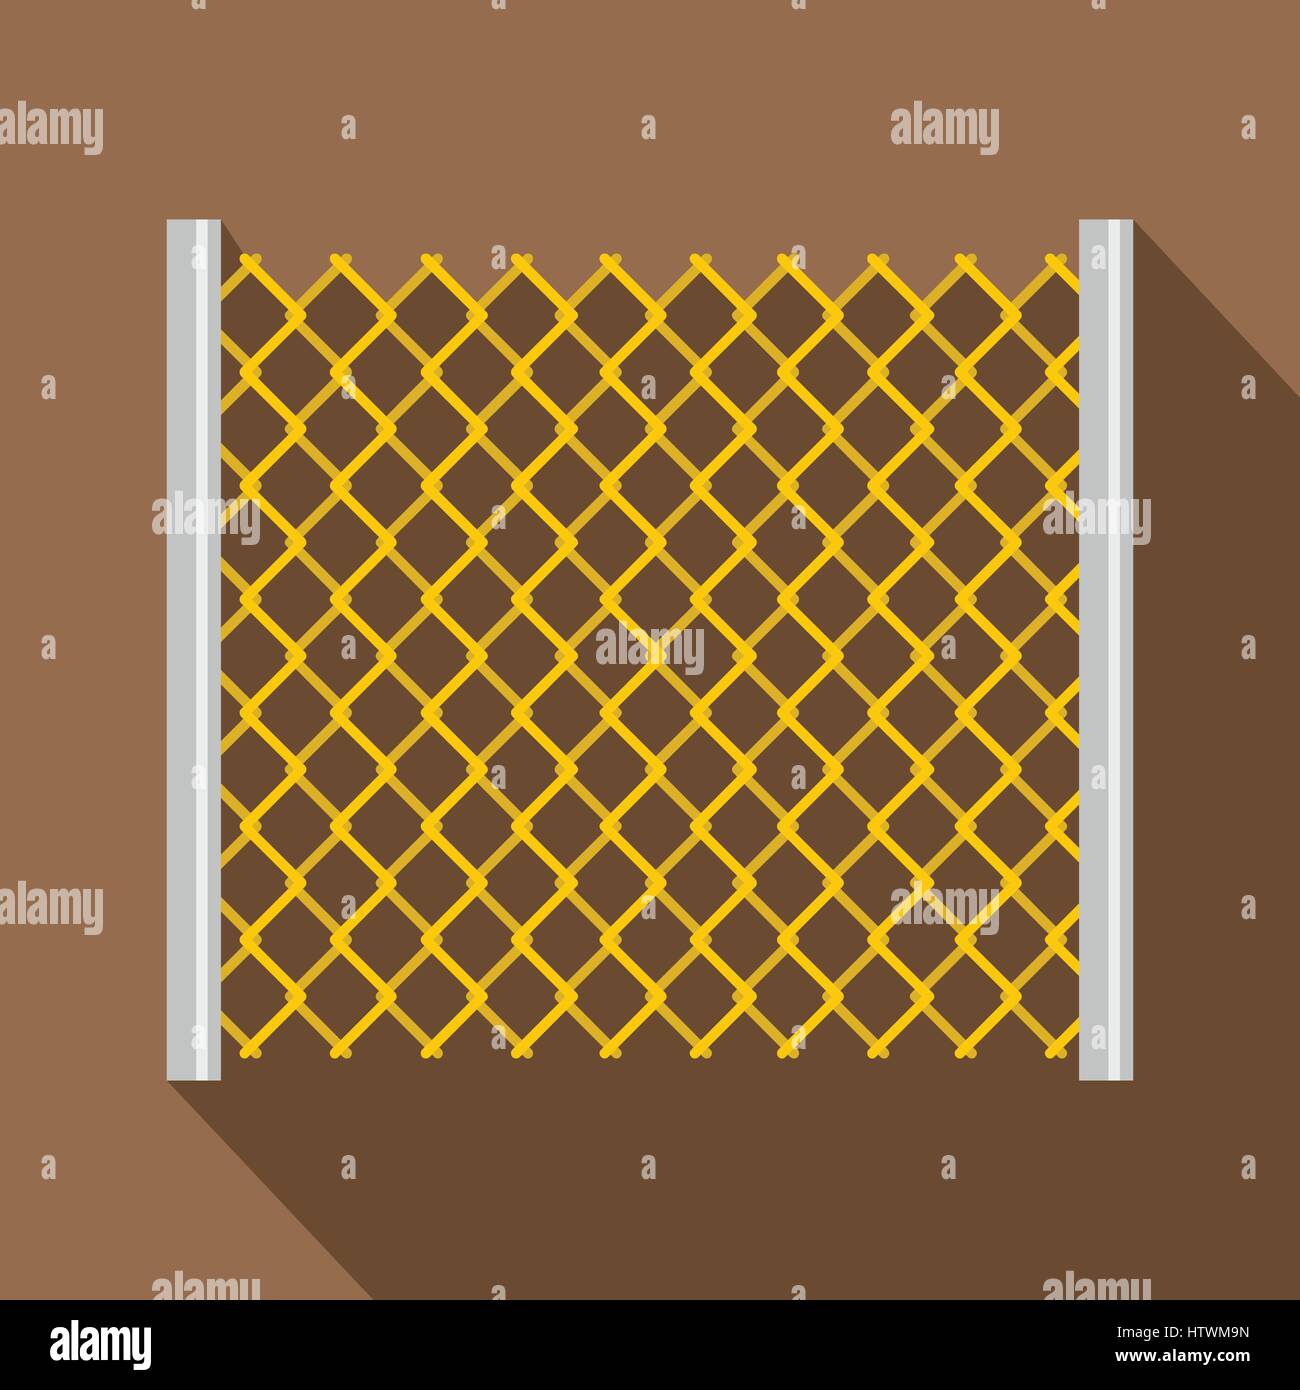 Perforated gate icon, flat style Stock Vector